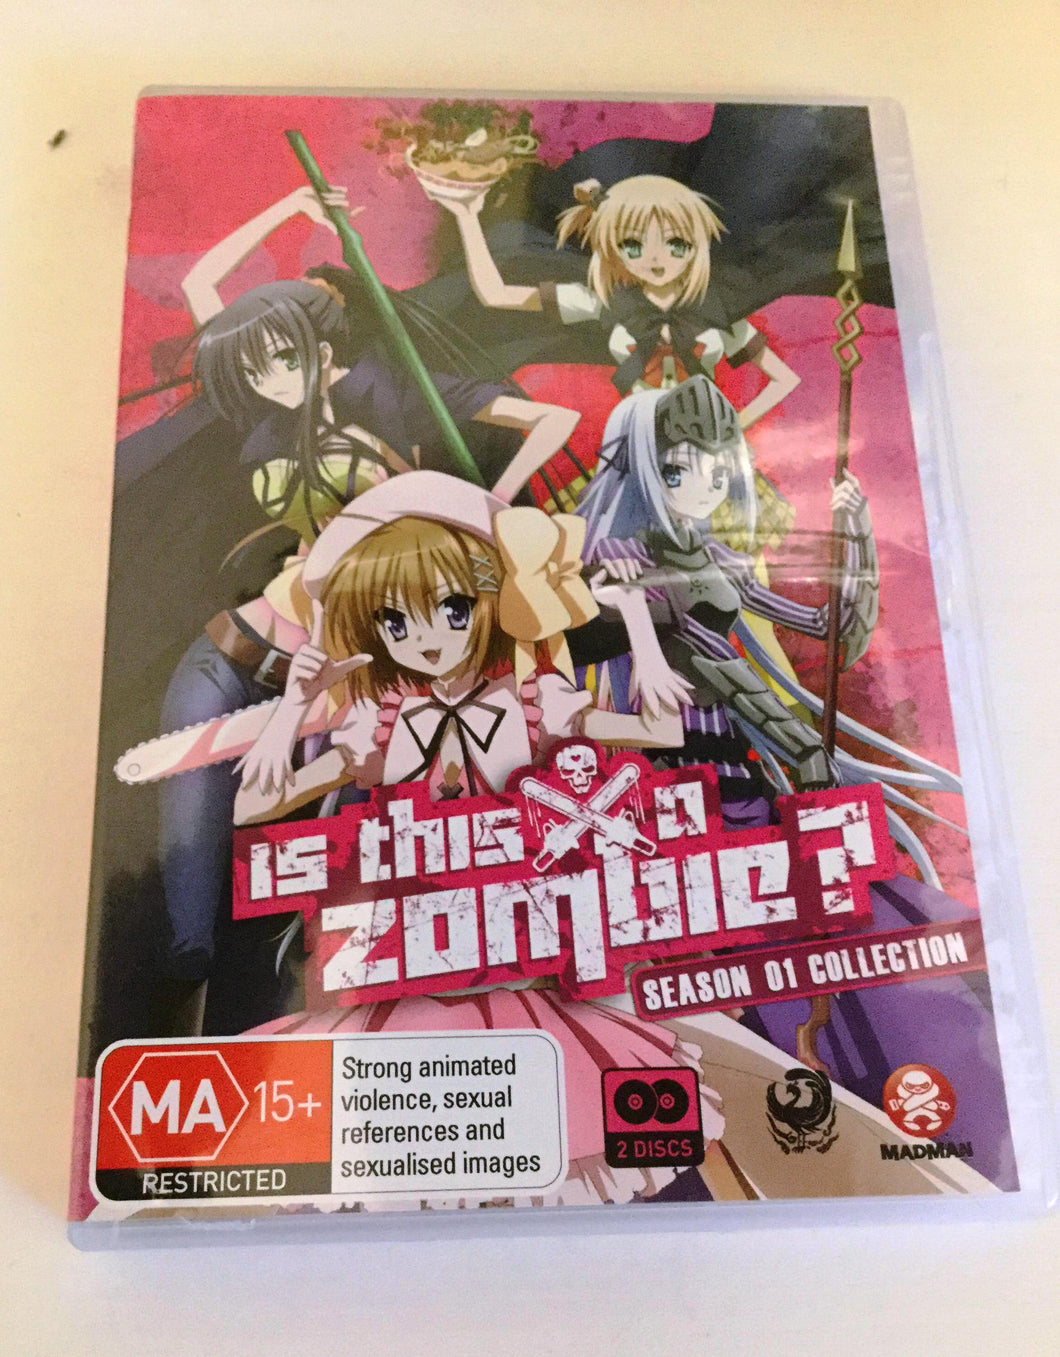 Is This a Zombie?  -Season 1 Collection 2 discs #PRE OWNED